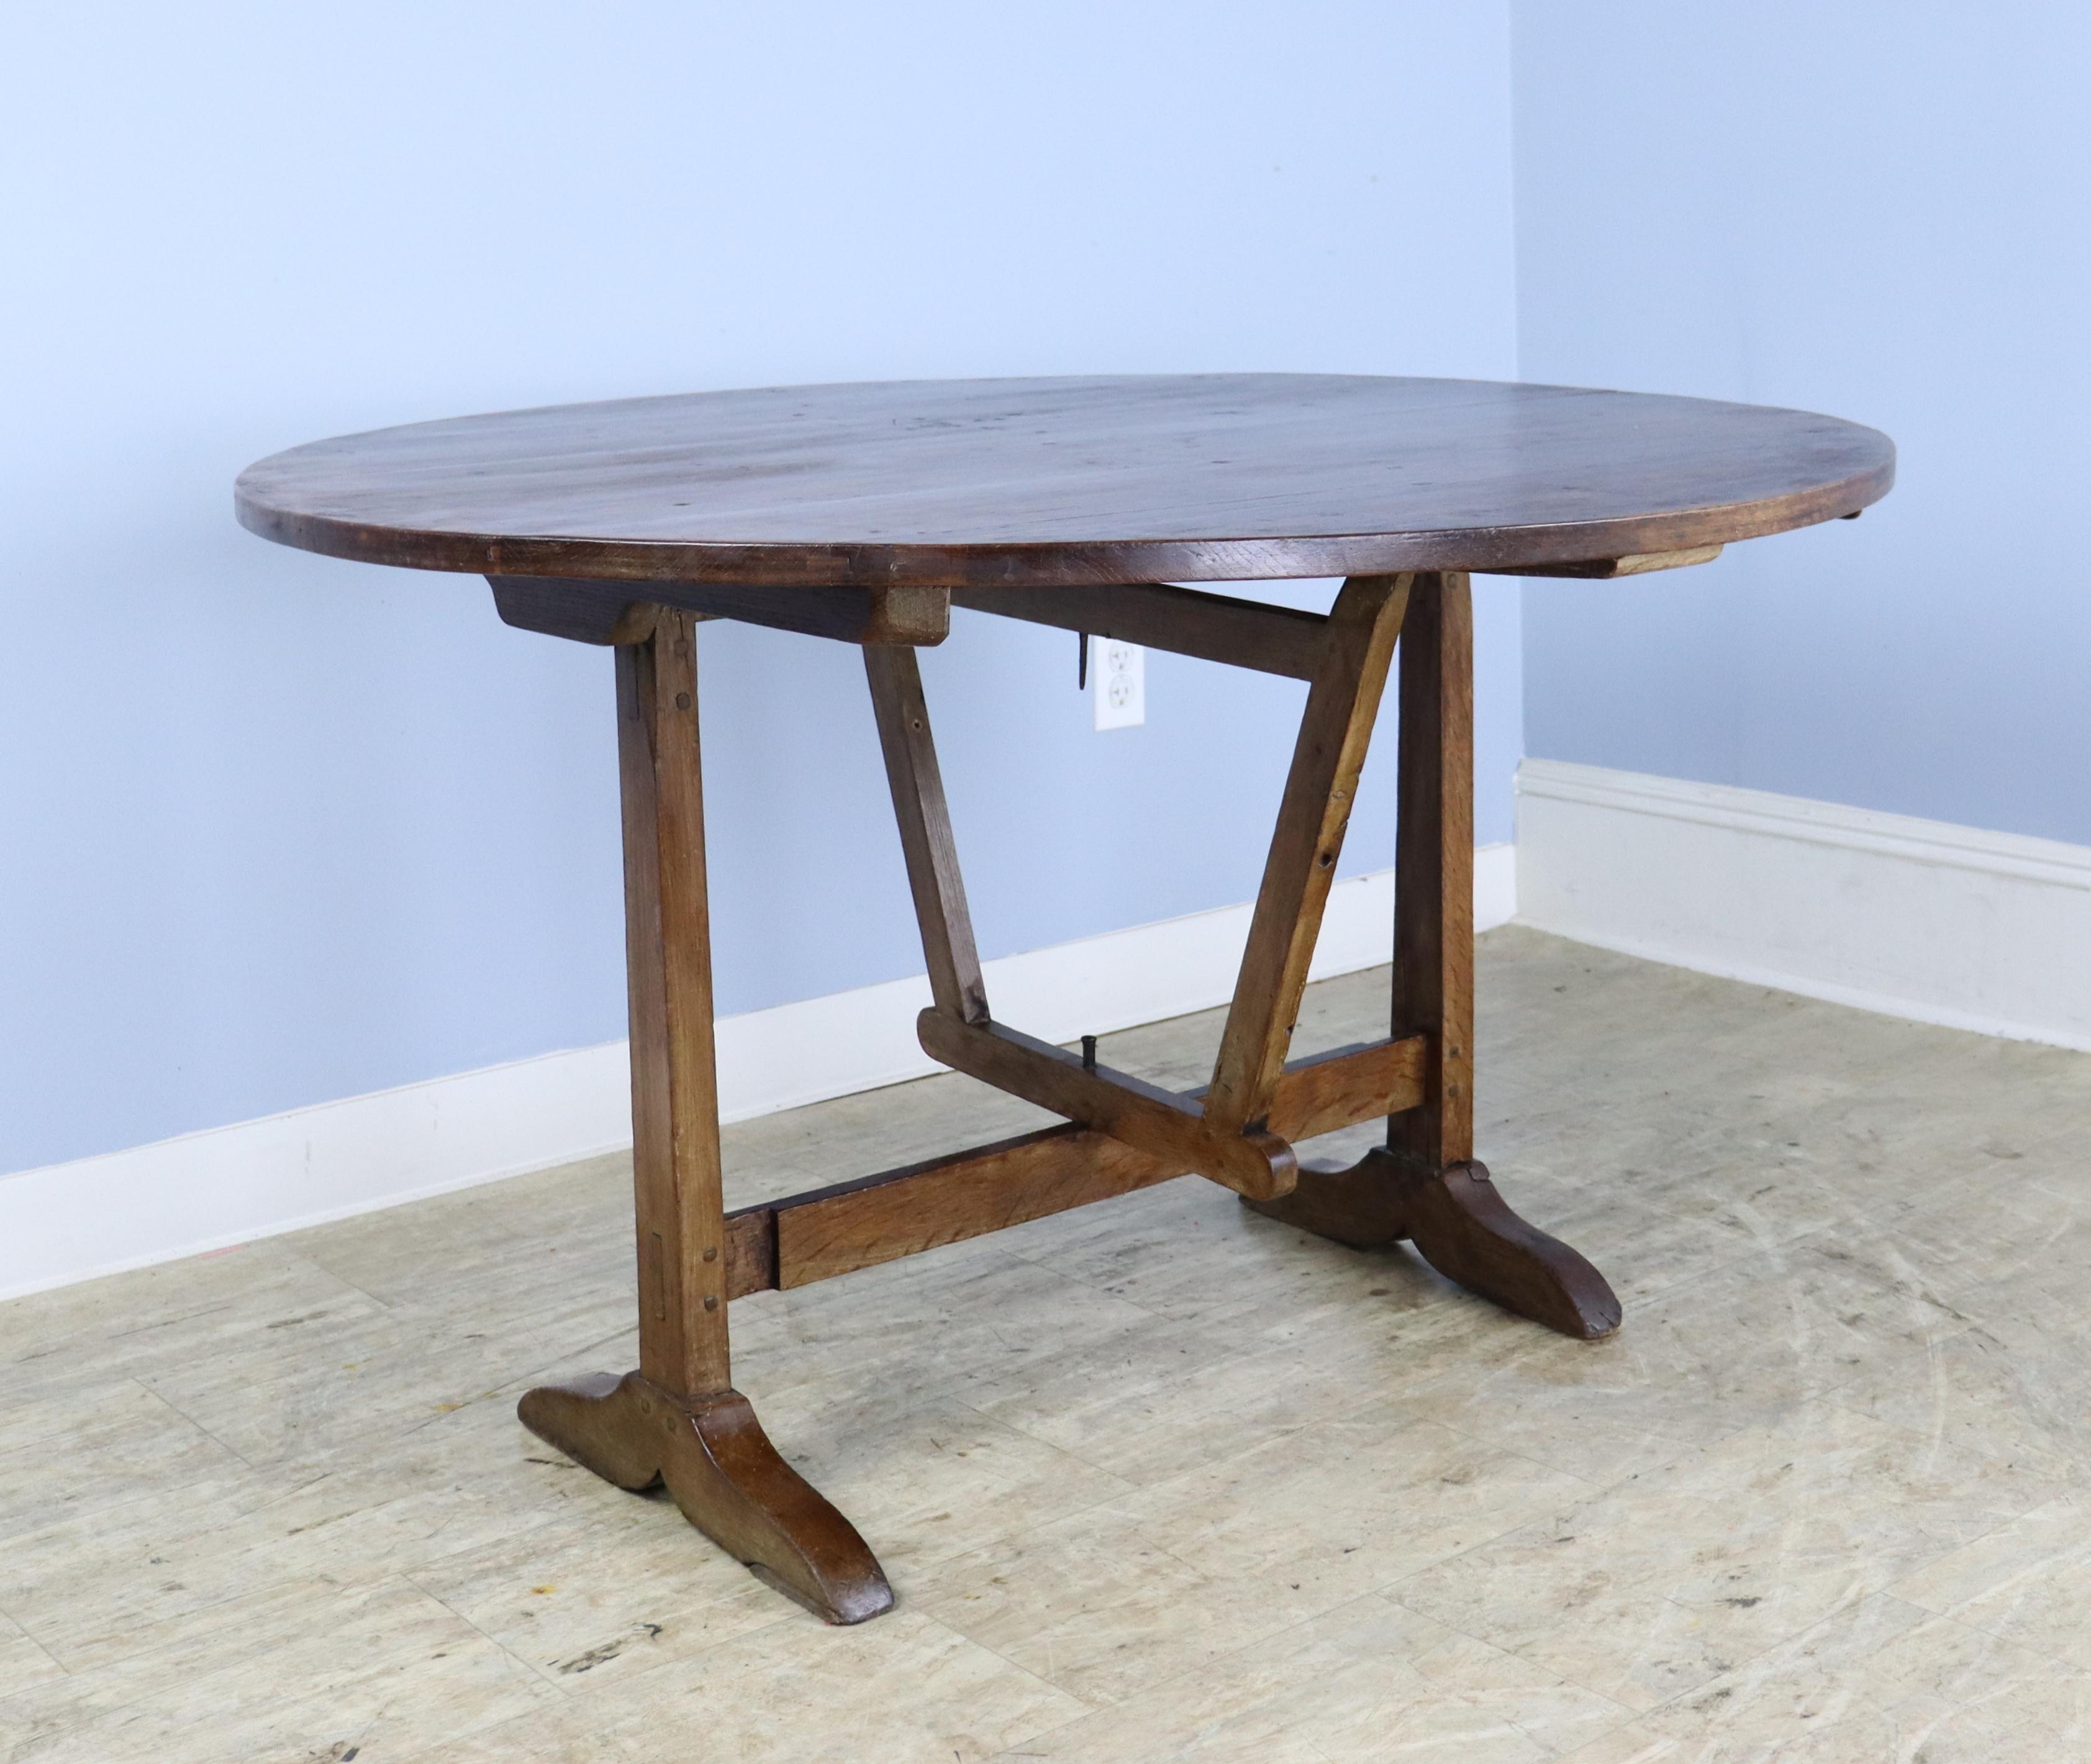 The walnut graining on this very good vendange wine tasting table is smooth and consistent. The top has a nice patinated edge. The swivel gateleg table base is easy to use and is sturdy. The table can be stored upright if required, but would be a